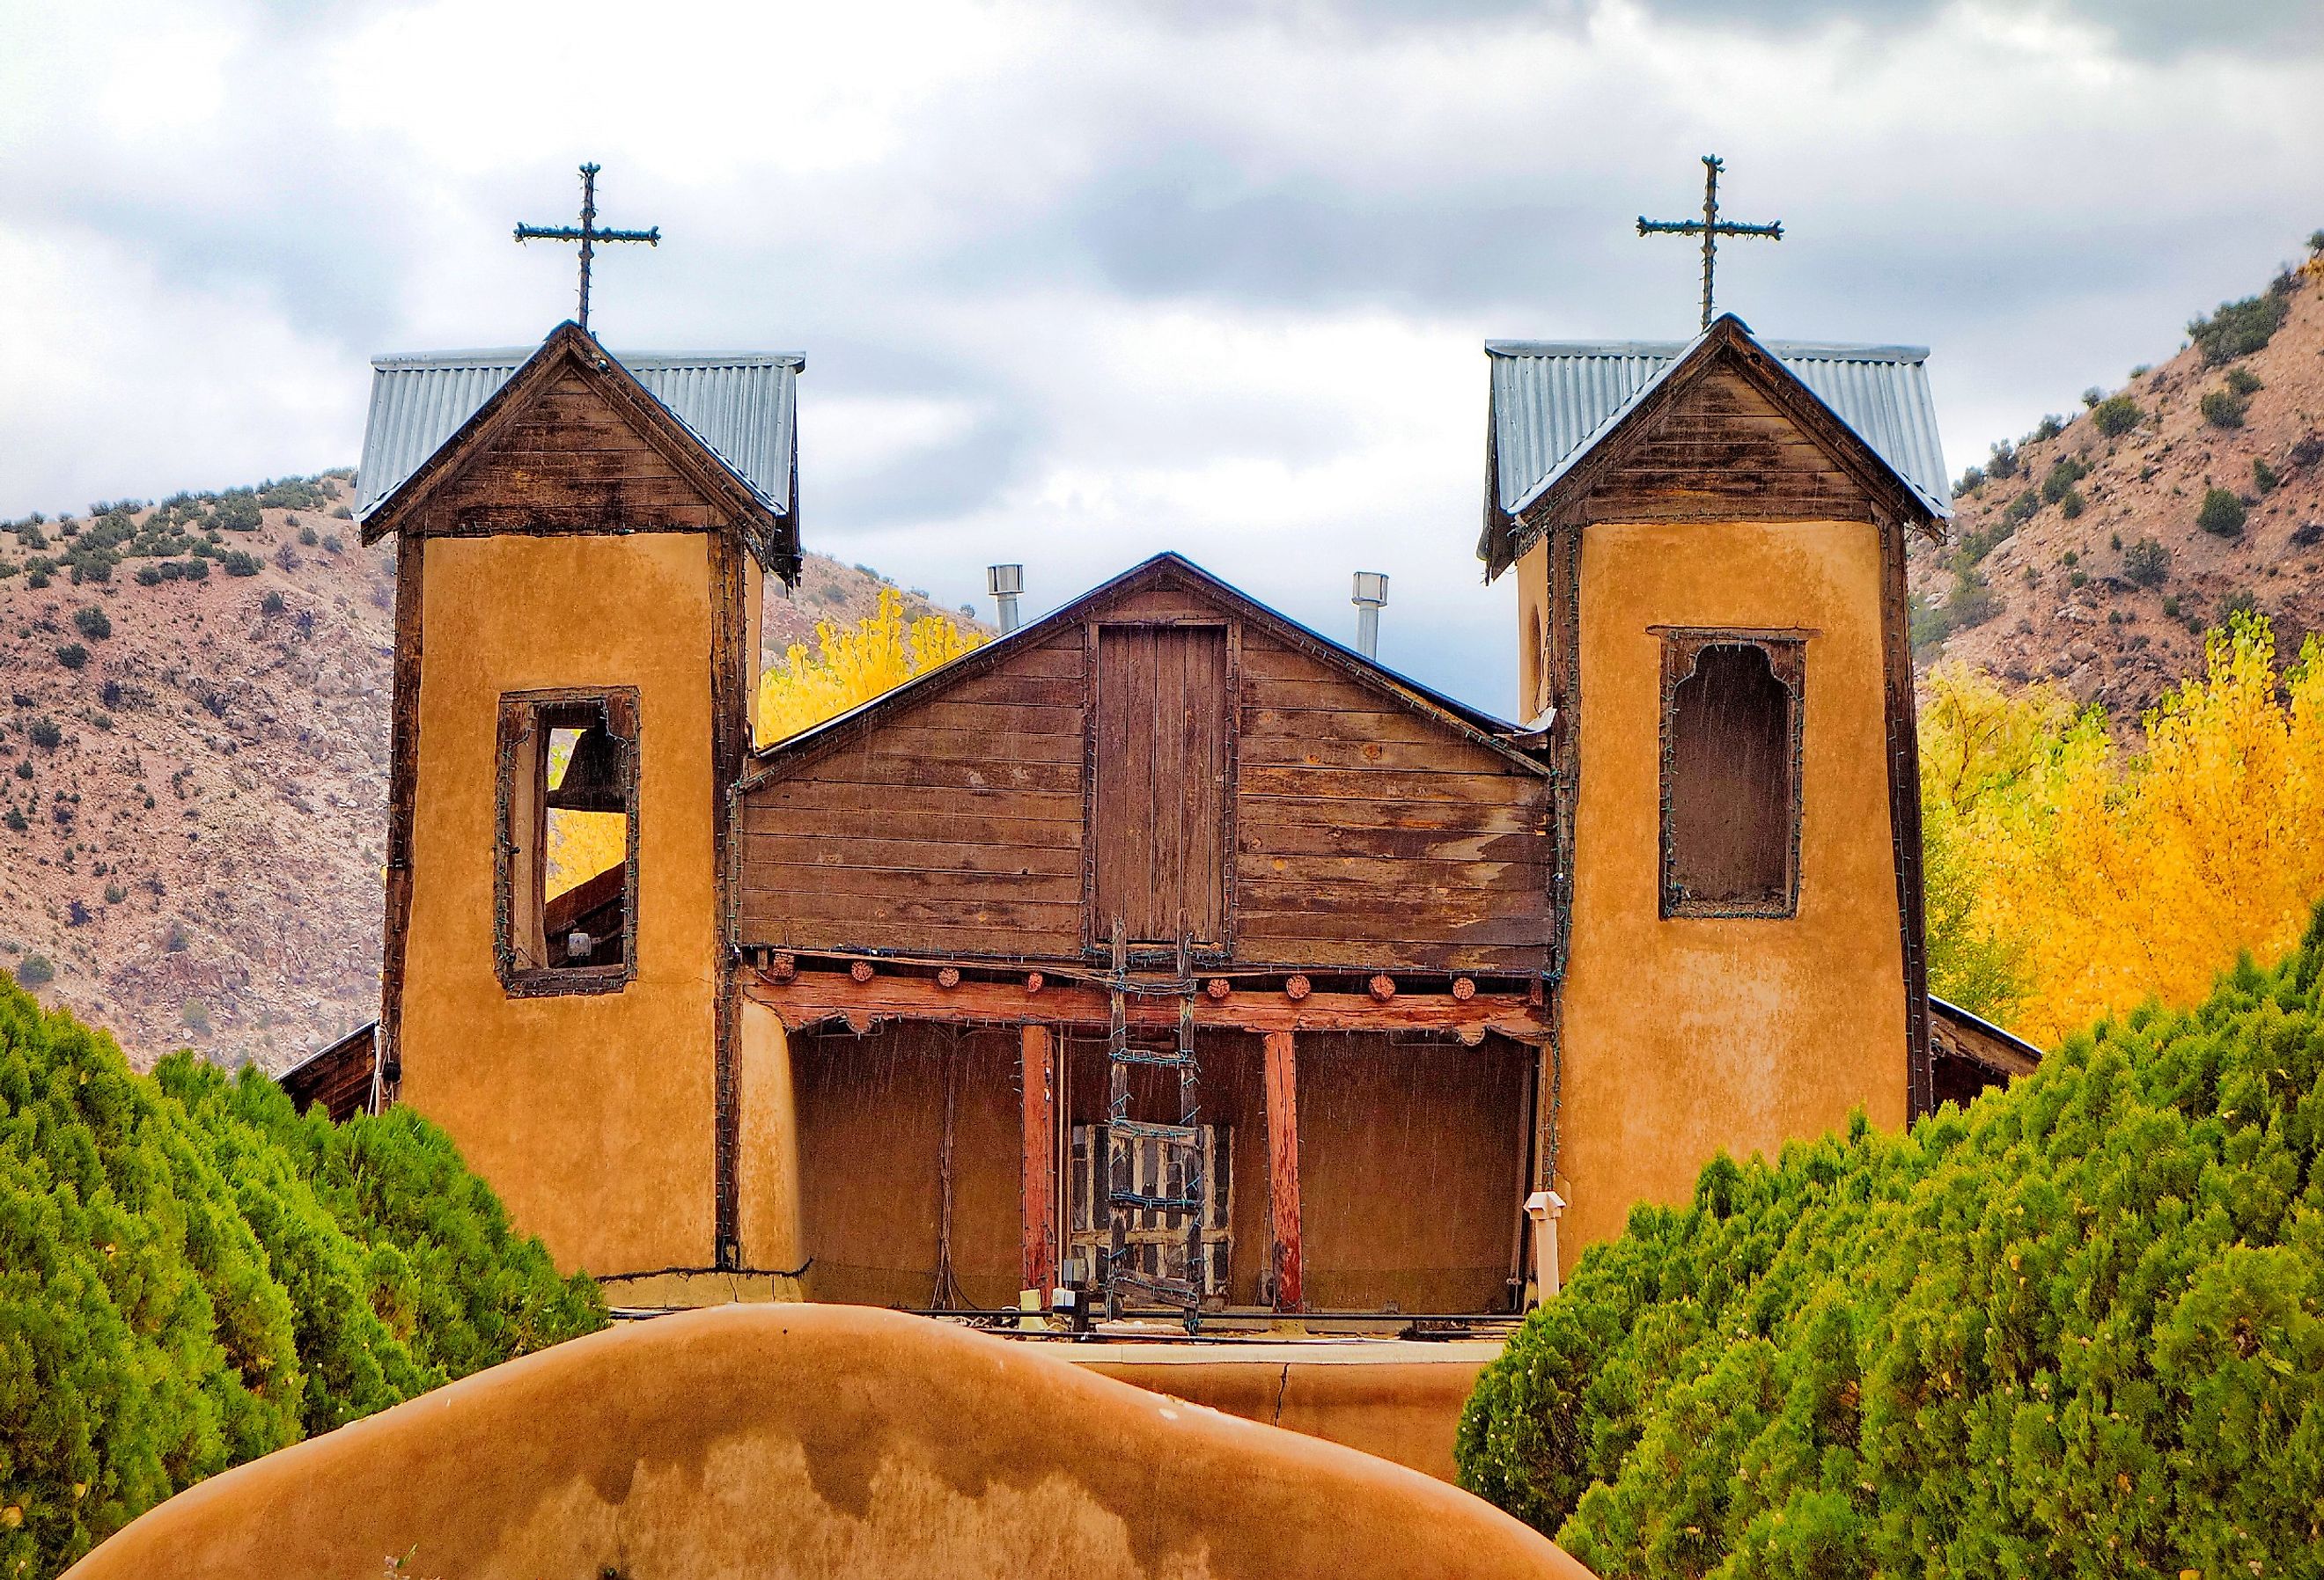 The famous historic Sanctuary of Chimayo with a garden in New Mexico, US.